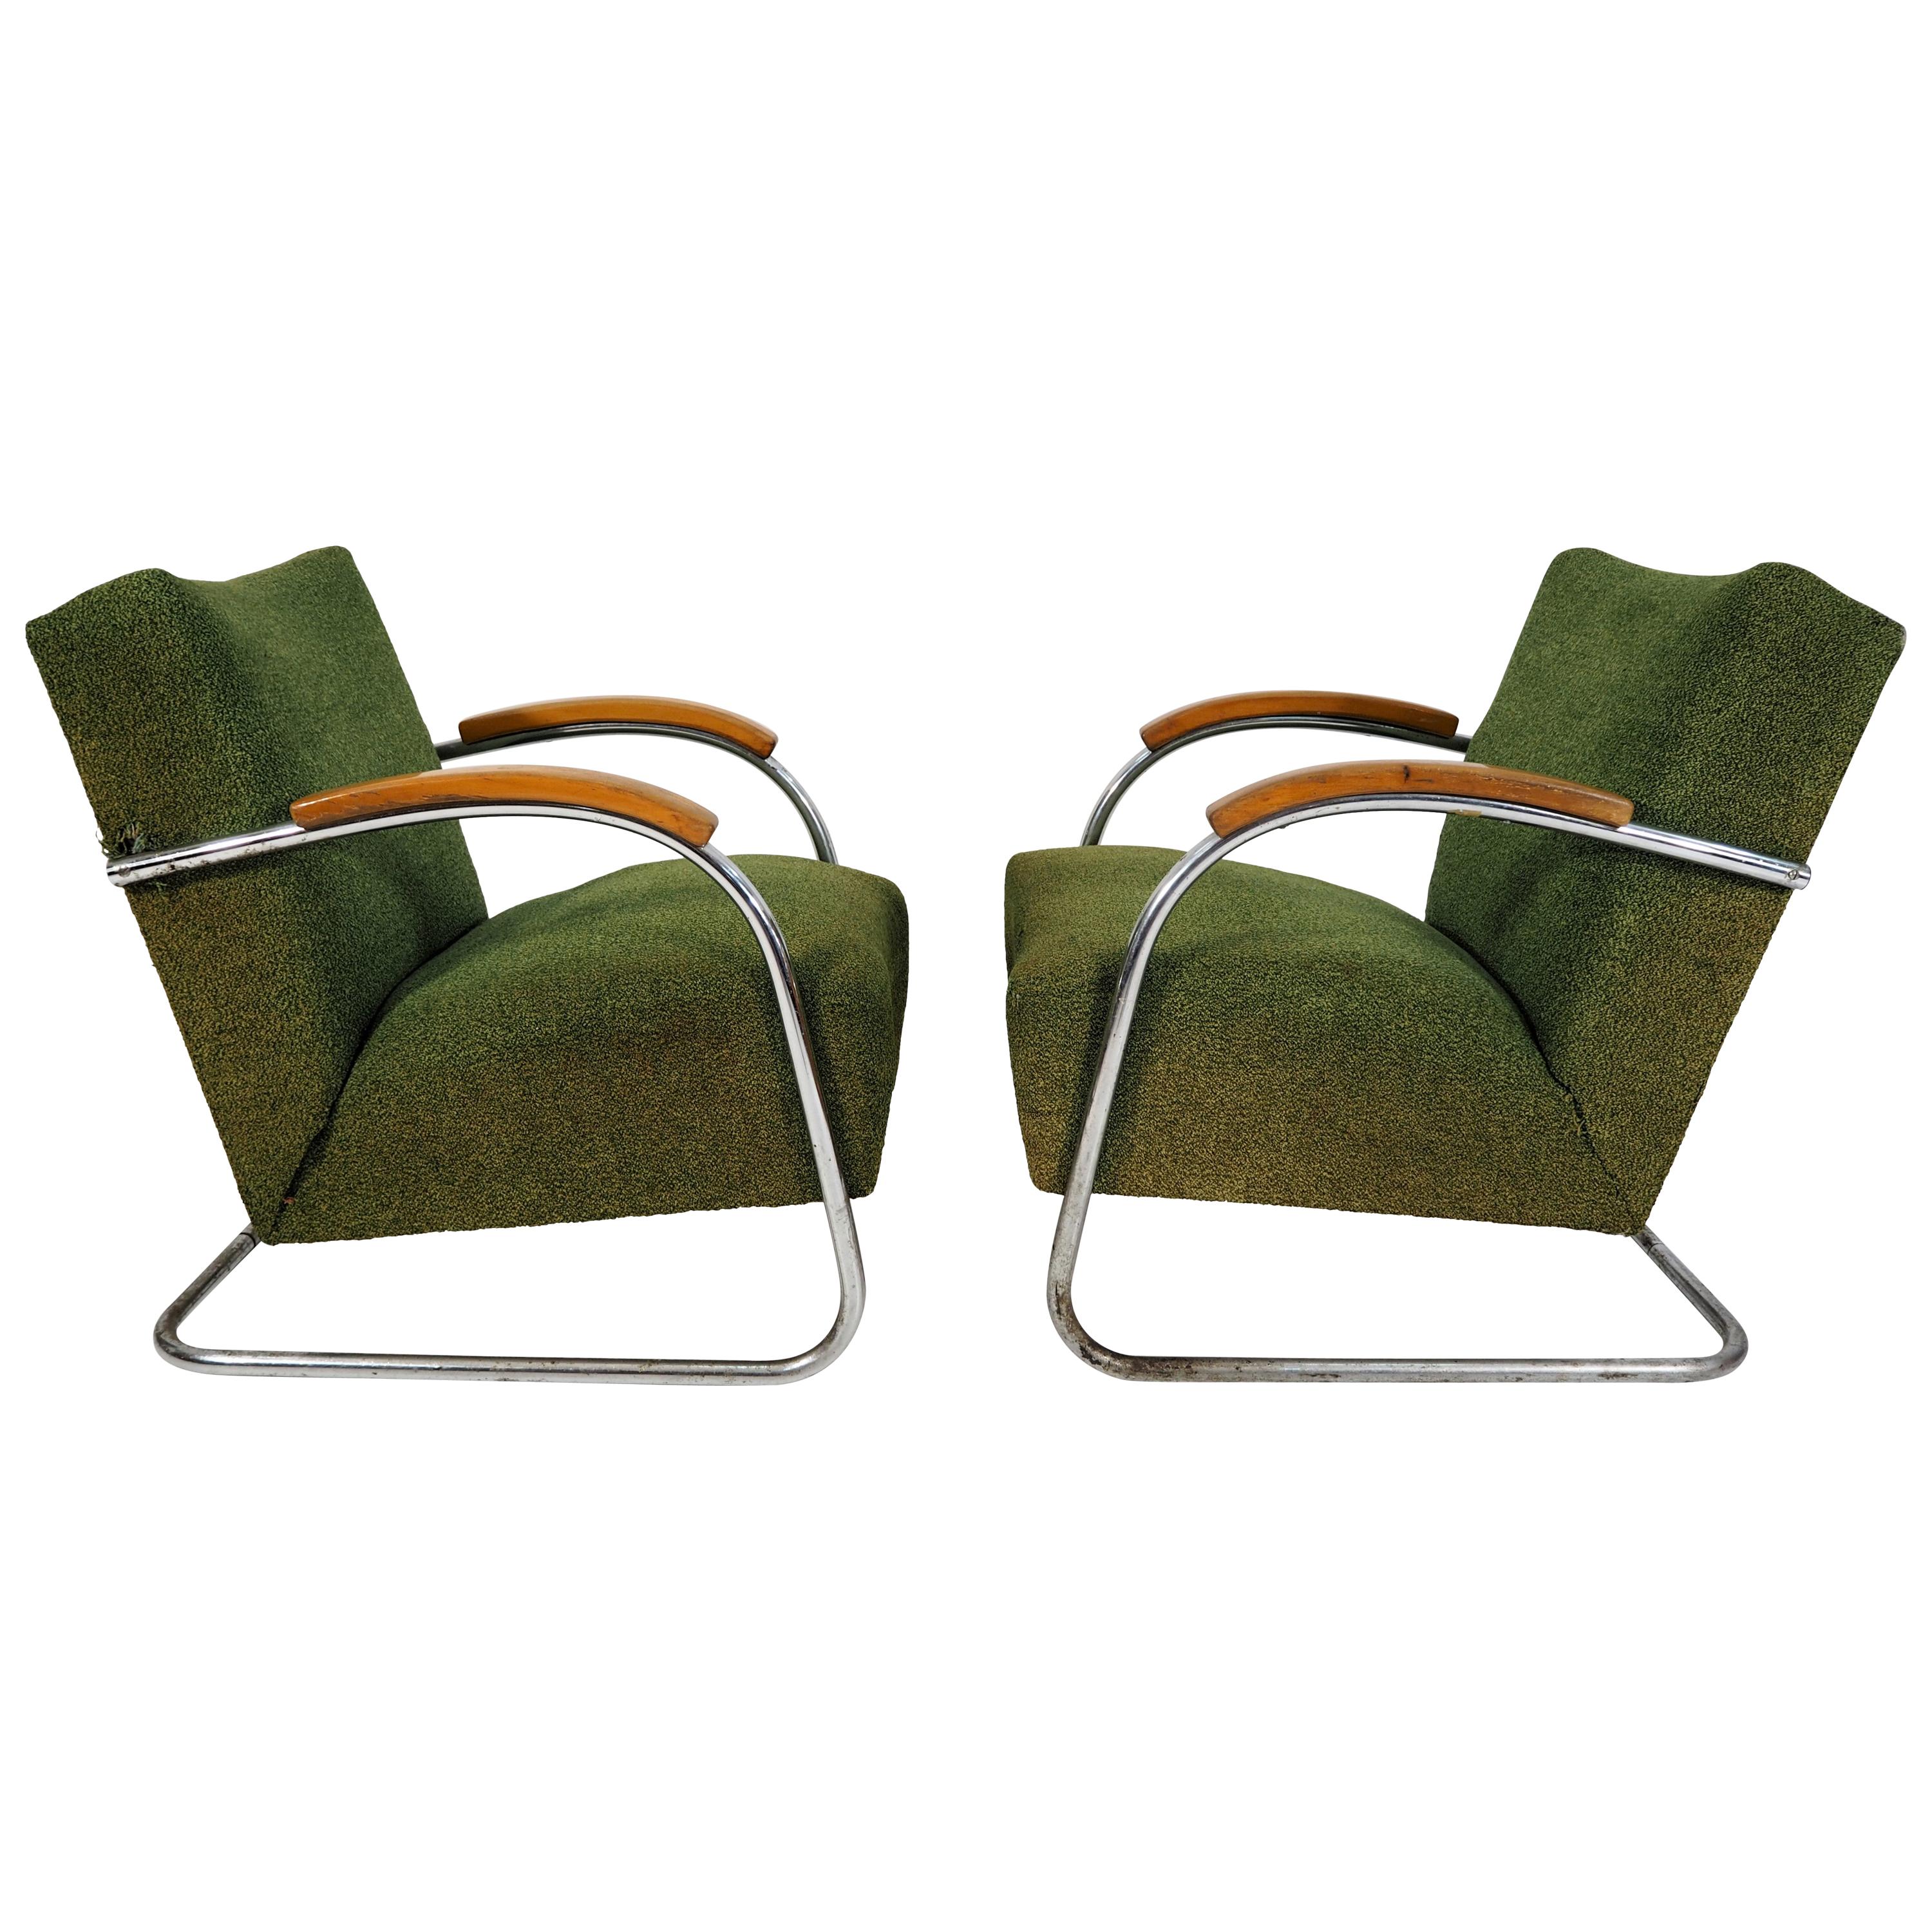 Classic Czech Chrome Chairs from Mücke Melder, 1940s, Set of 2